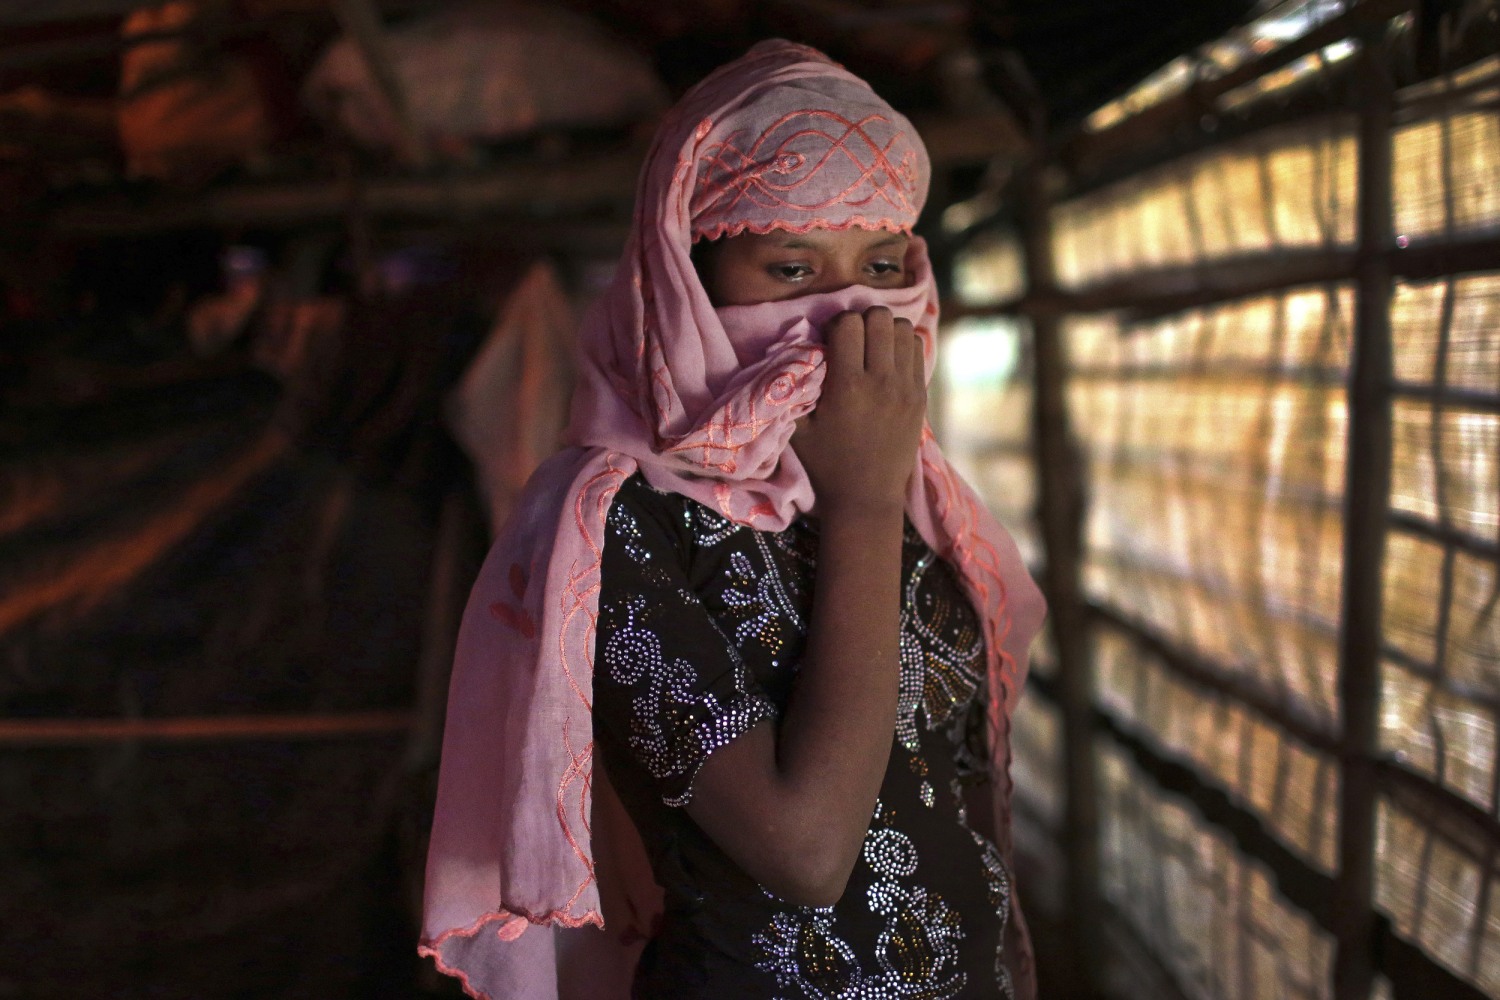 Xxx Kidnap And Rape Collage Girl - 21 Rohingya women detail systemic, brutal rapes by Myanmar armed forces